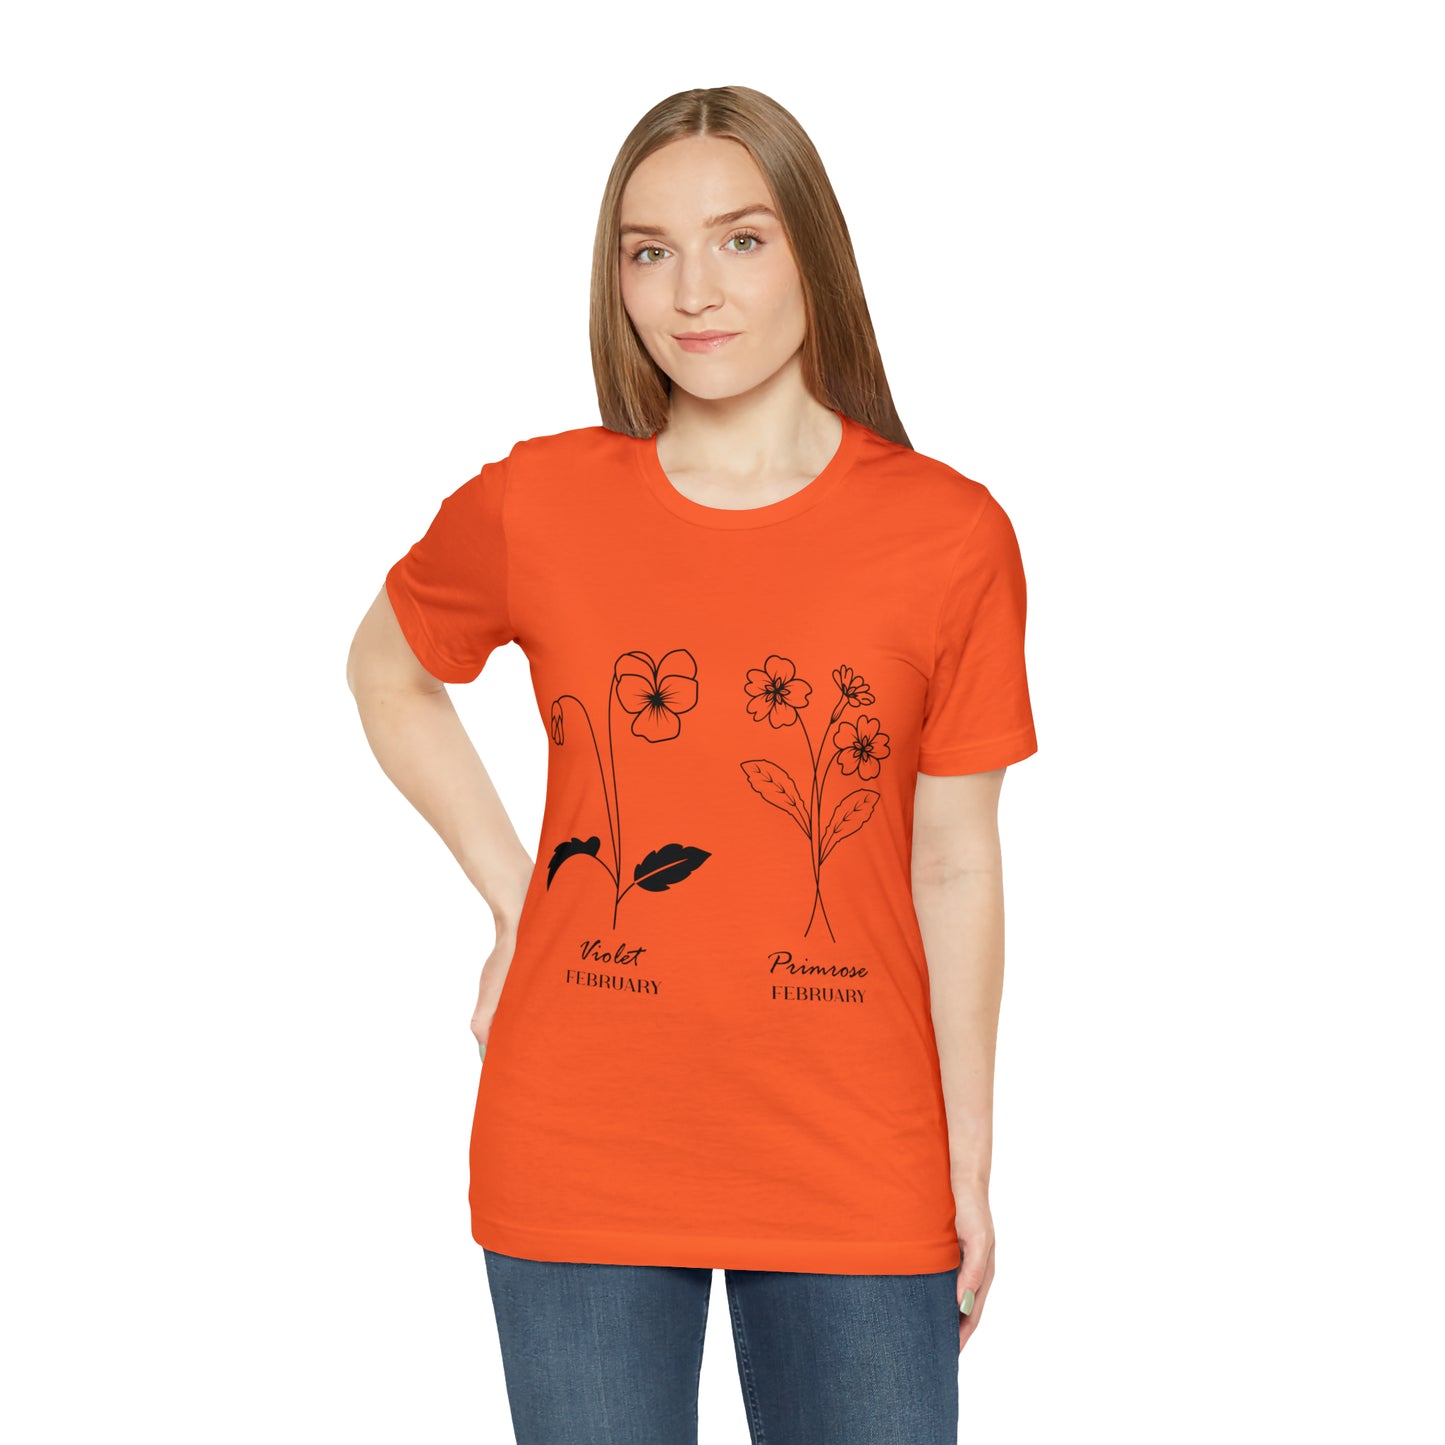 Flowers and Moths Style, February, Unisex Jersey Short Sleeve Tee